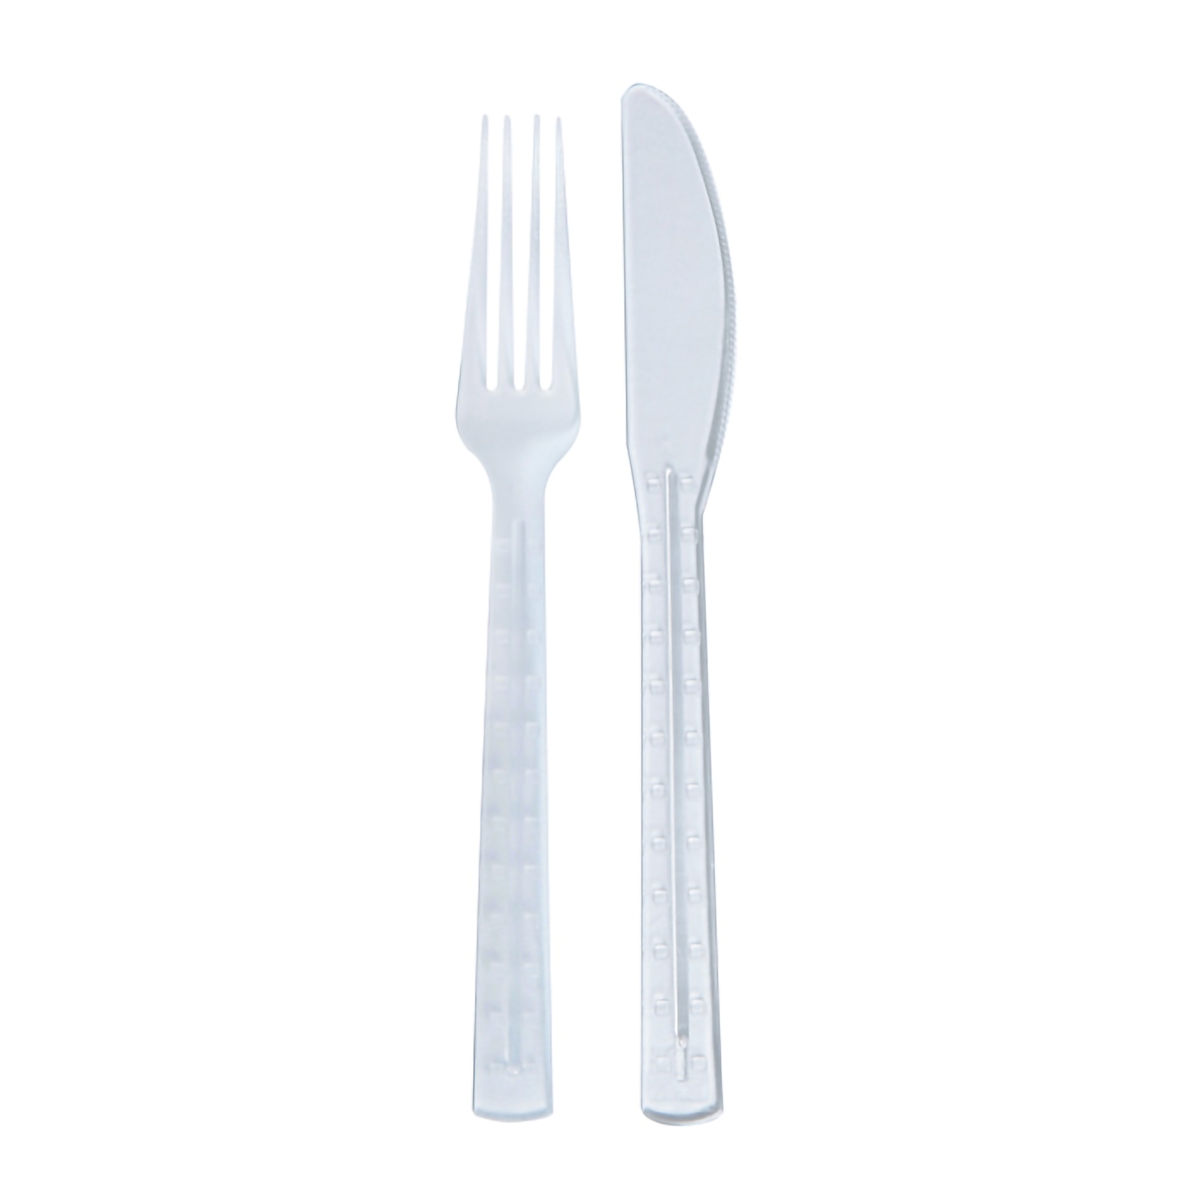 210cv9k2t 7.5 In. First Class Kit With 2 Fork & Knife, Clear